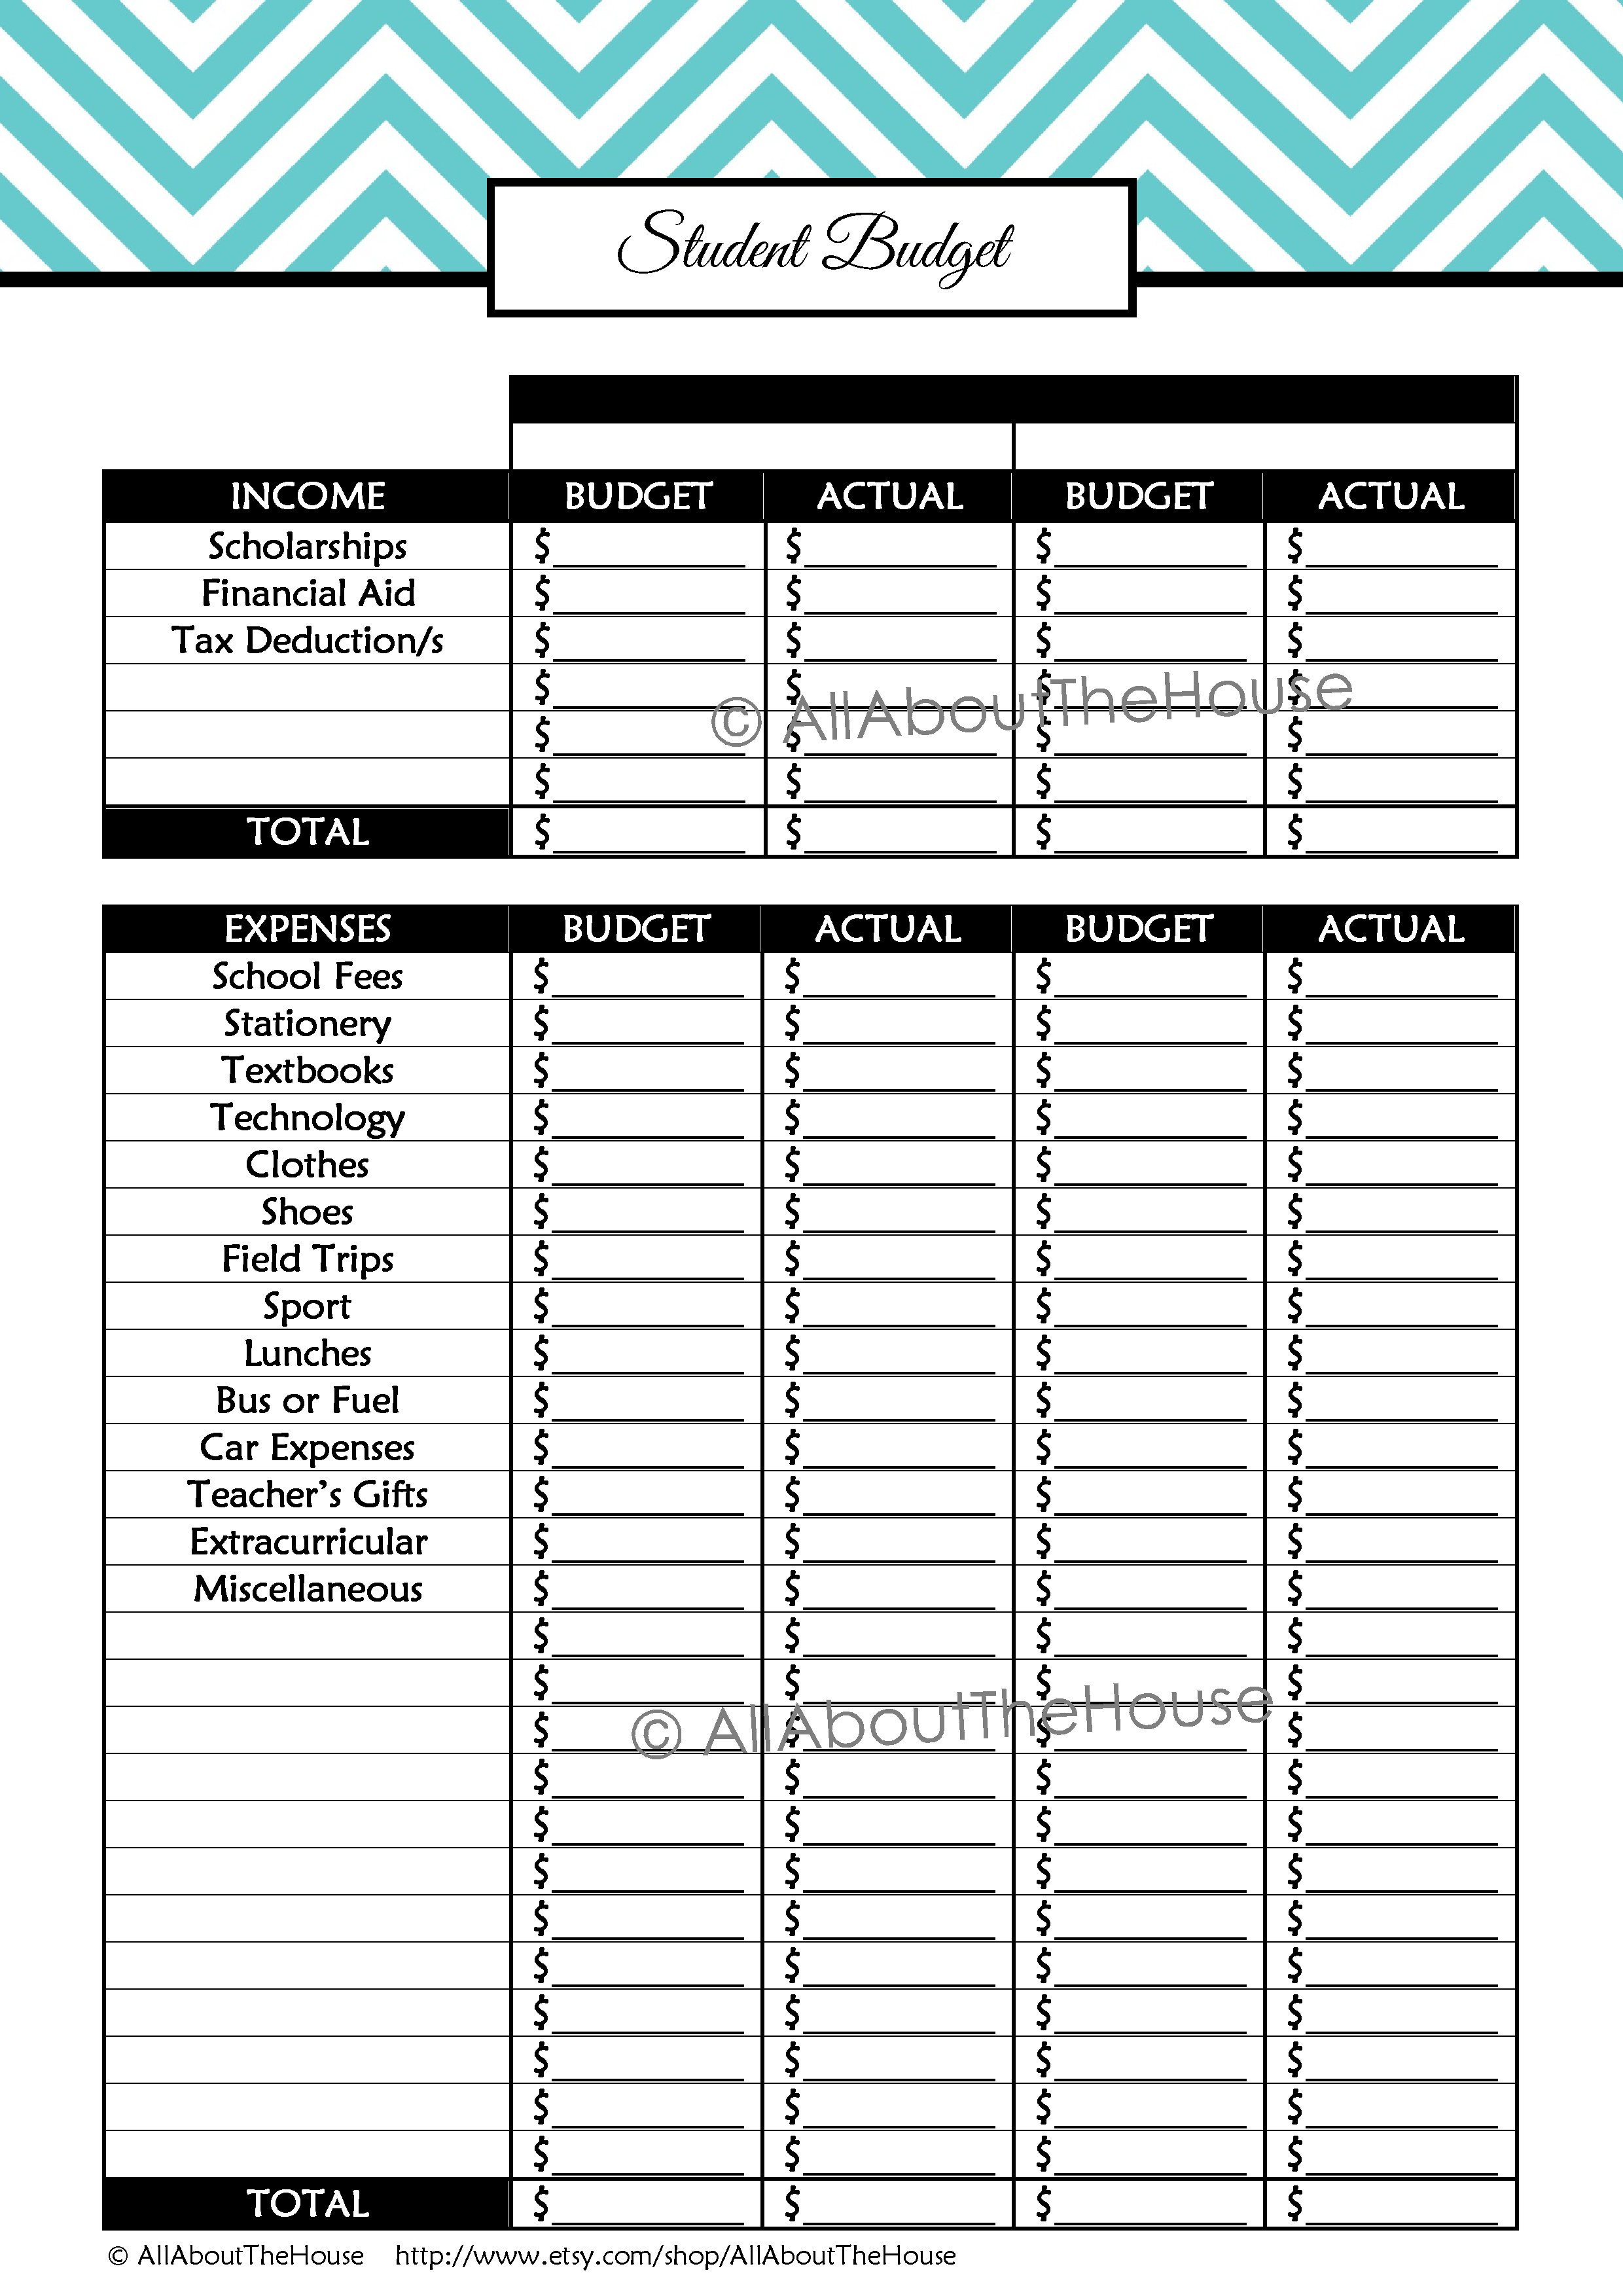 016 Image Student Budget Planner Template Plan Awful Templates Along With High School Student Budget Worksheet